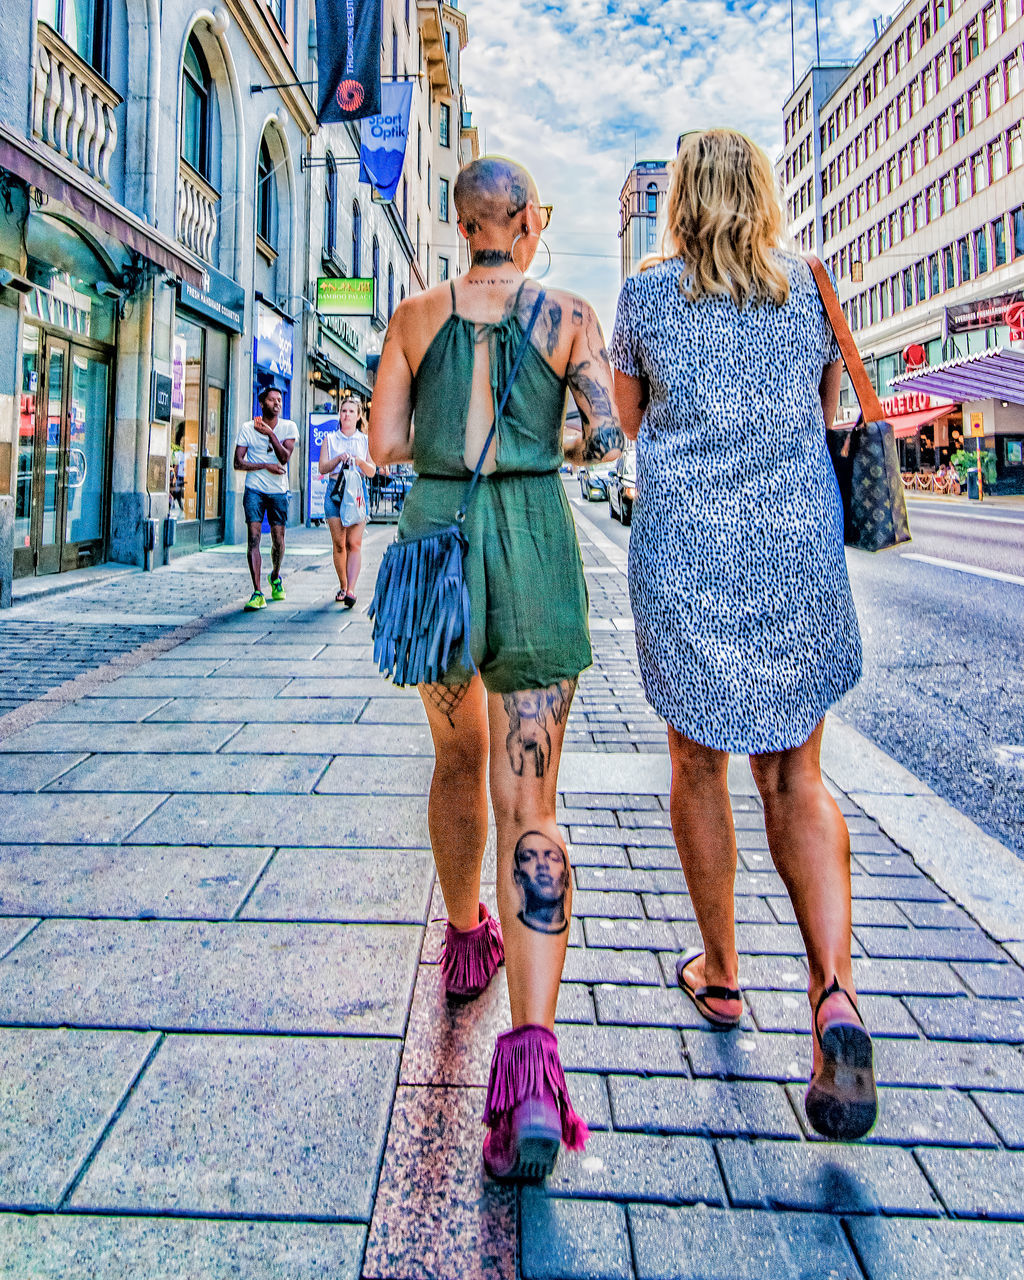 city, women, full length, architecture, street, togetherness, adult, walking, building exterior, group of people, city life, females, day, mid adult, leisure activity, men, real people, males, fashion, outdoors, city street, positive emotion